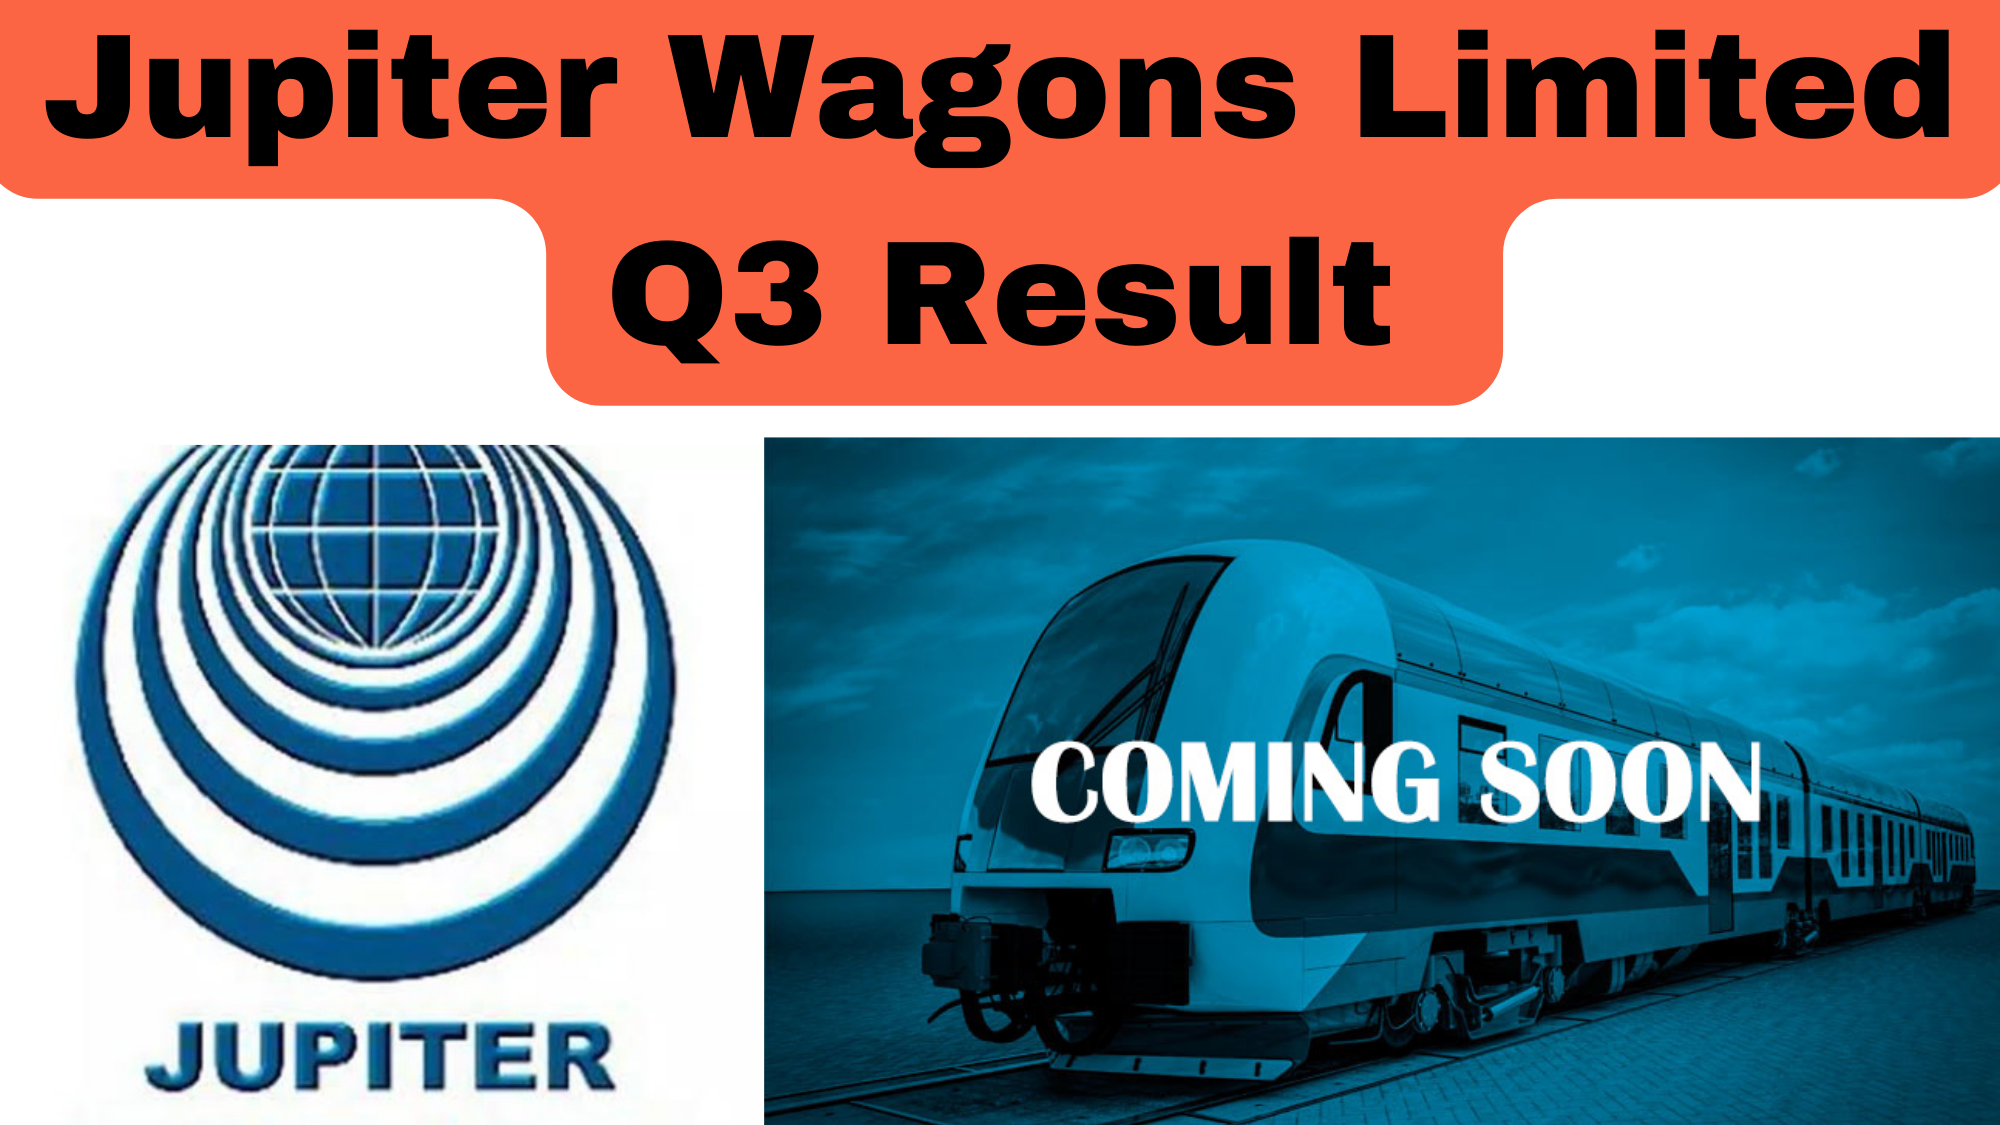 Jupiter Wagons has recently achieved its highest numbers